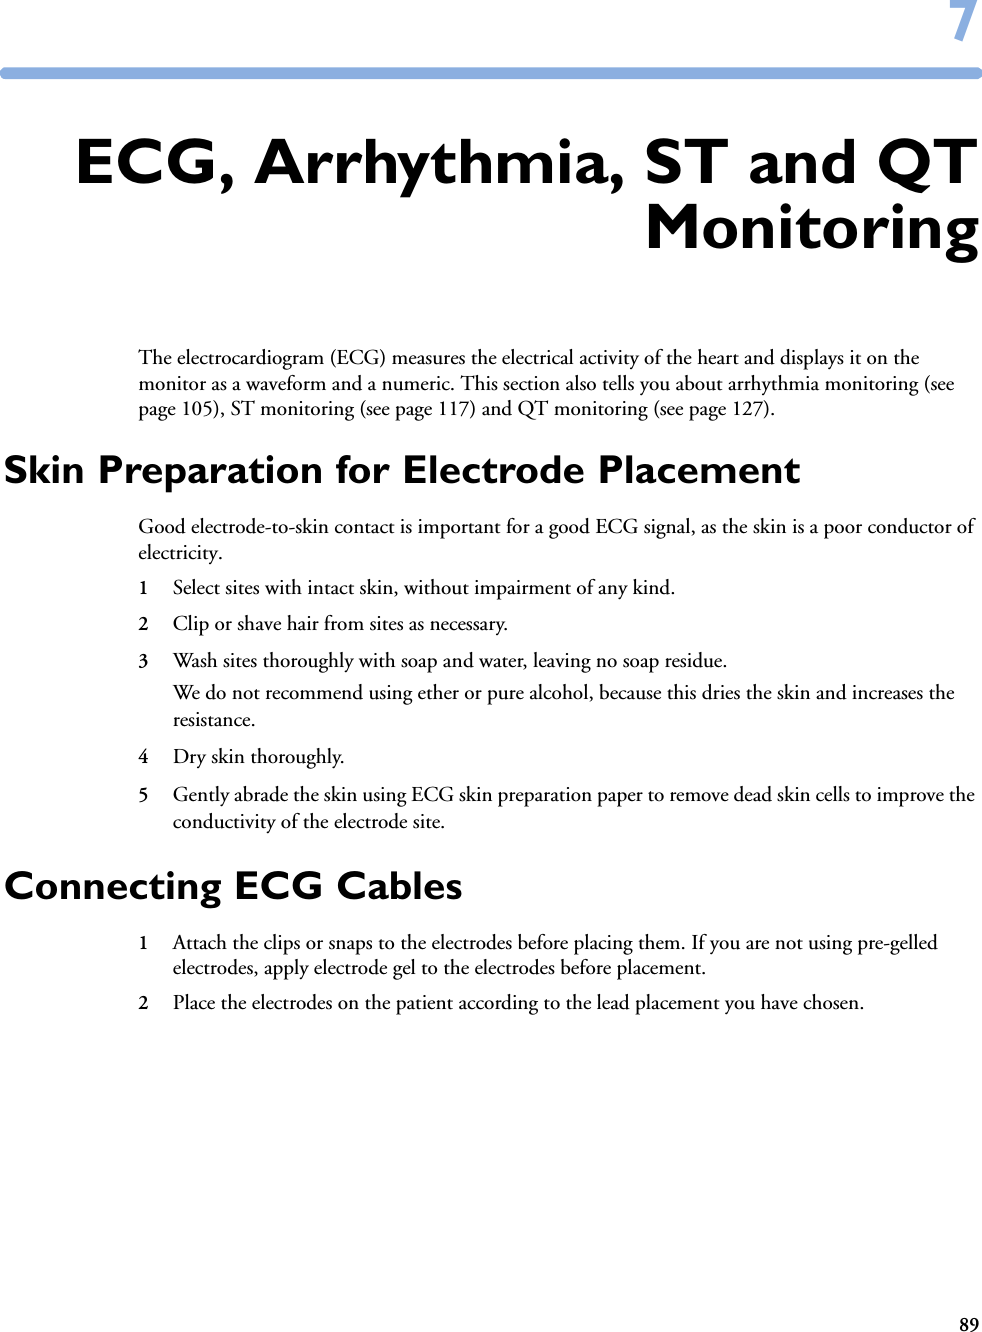 8977ECG, Arrhythmia, ST and QTMonitoringThe electrocardiogram (ECG) measures the electrical activity of the heart and displays it on the monitor as a waveform and a numeric. This section also tells you about arrhythmia monitoring (see page 105), ST monitoring (see page 117) and QT monitoring (see page 127).Skin Preparation for Electrode PlacementGood electrode-to-skin contact is important for a good ECG signal, as the skin is a poor conductor of electricity.1Select sites with intact skin, without impairment of any kind.2Clip or shave hair from sites as necessary.3Wash sites thoroughly with soap and water, leaving no soap residue. We do not recommend using ether or pure alcohol, because this dries the skin and increases the resistance.4Dry skin thoroughly.5Gently abrade the skin using ECG skin preparation paper to remove dead skin cells to improve the conductivity of the electrode site.Connecting ECG Cables1Attach the clips or snaps to the electrodes before placing them. If you are not using pre-gelled electrodes, apply electrode gel to the electrodes before placement.2Place the electrodes on the patient according to the lead placement you have chosen. 